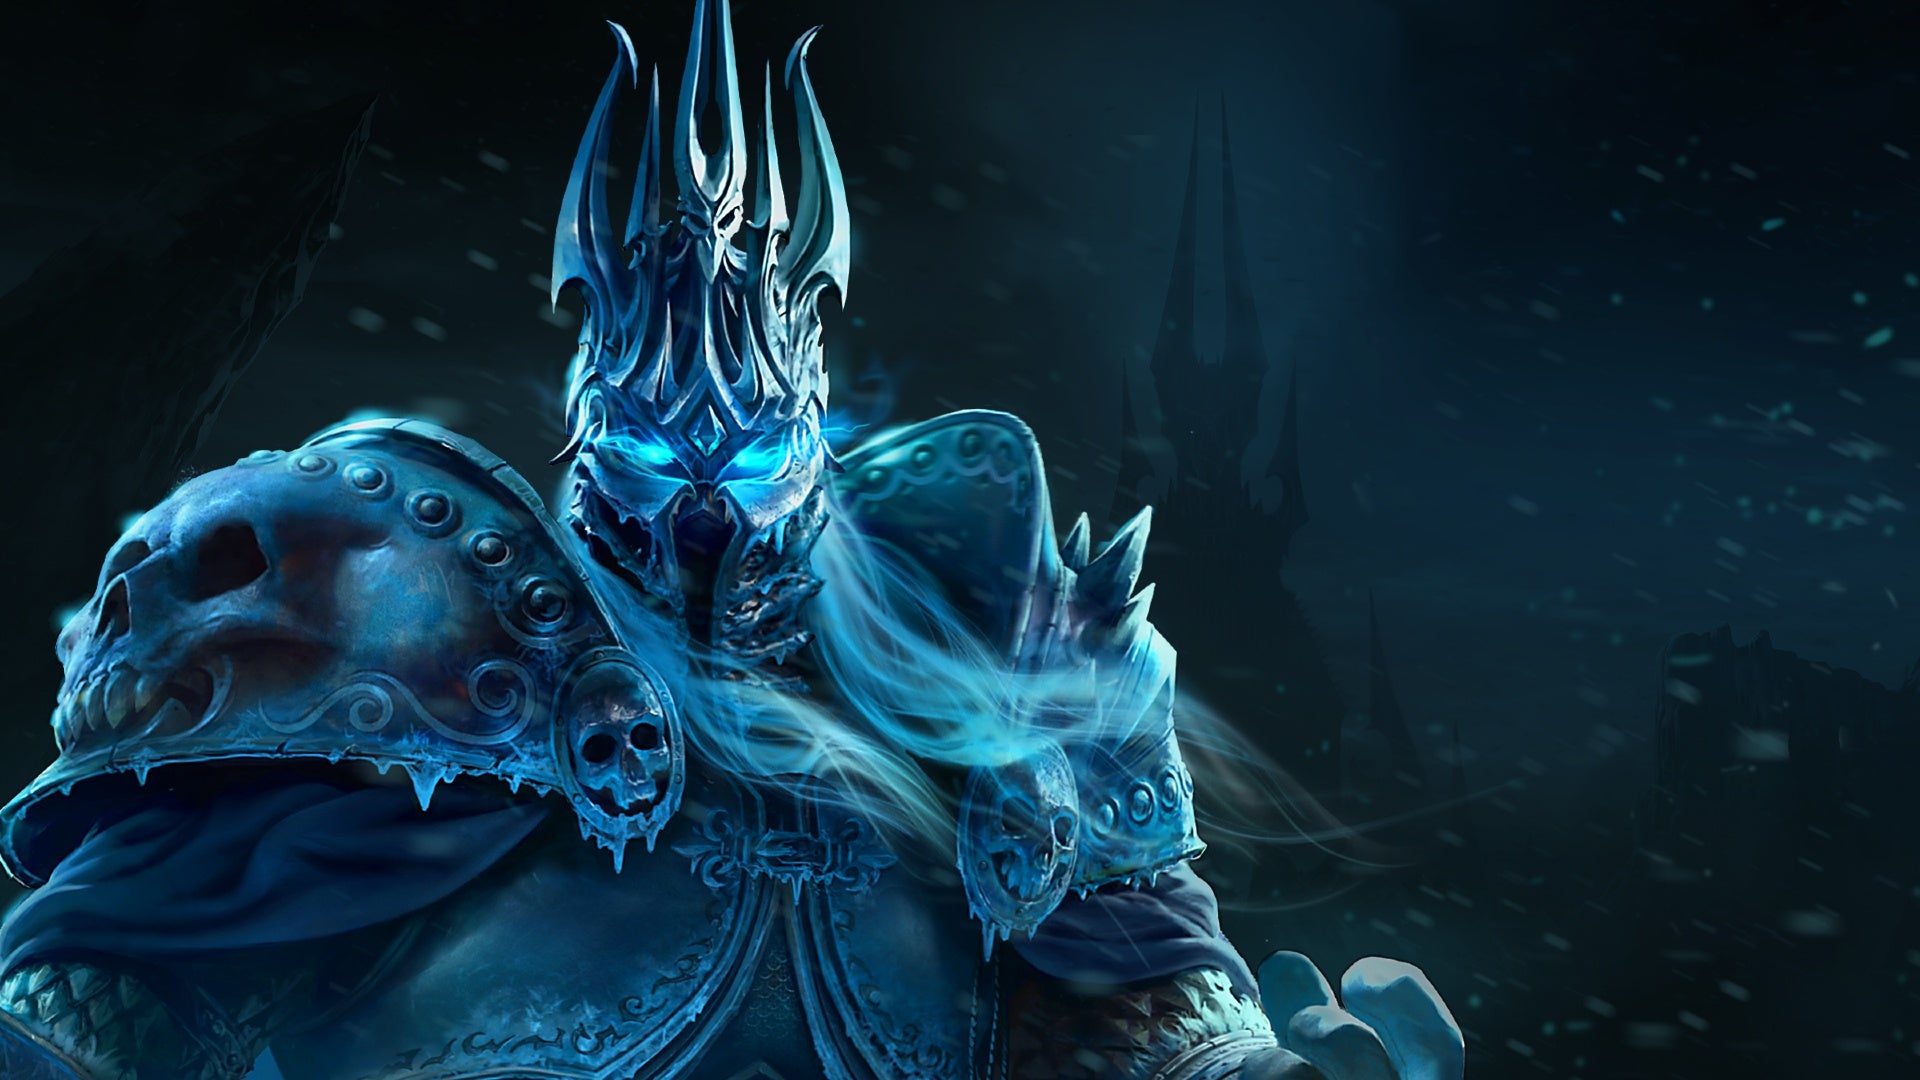 Wrath Of The Lich King Classic is an expansion for World Of Warcraft Classic, coming September 26th, 2022.